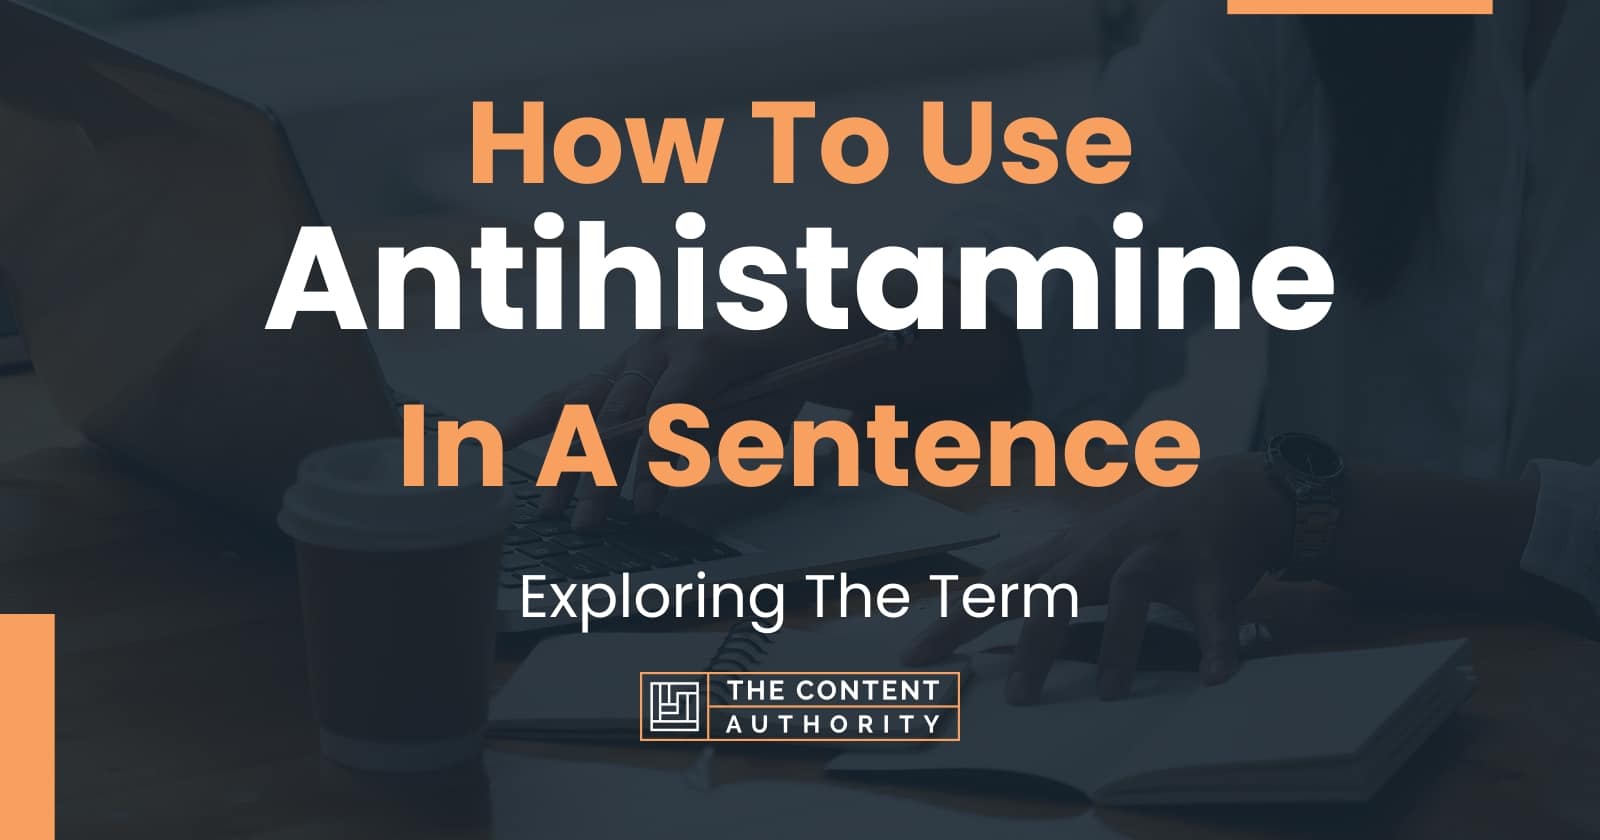 How To Use Antihistamine In A Sentence 